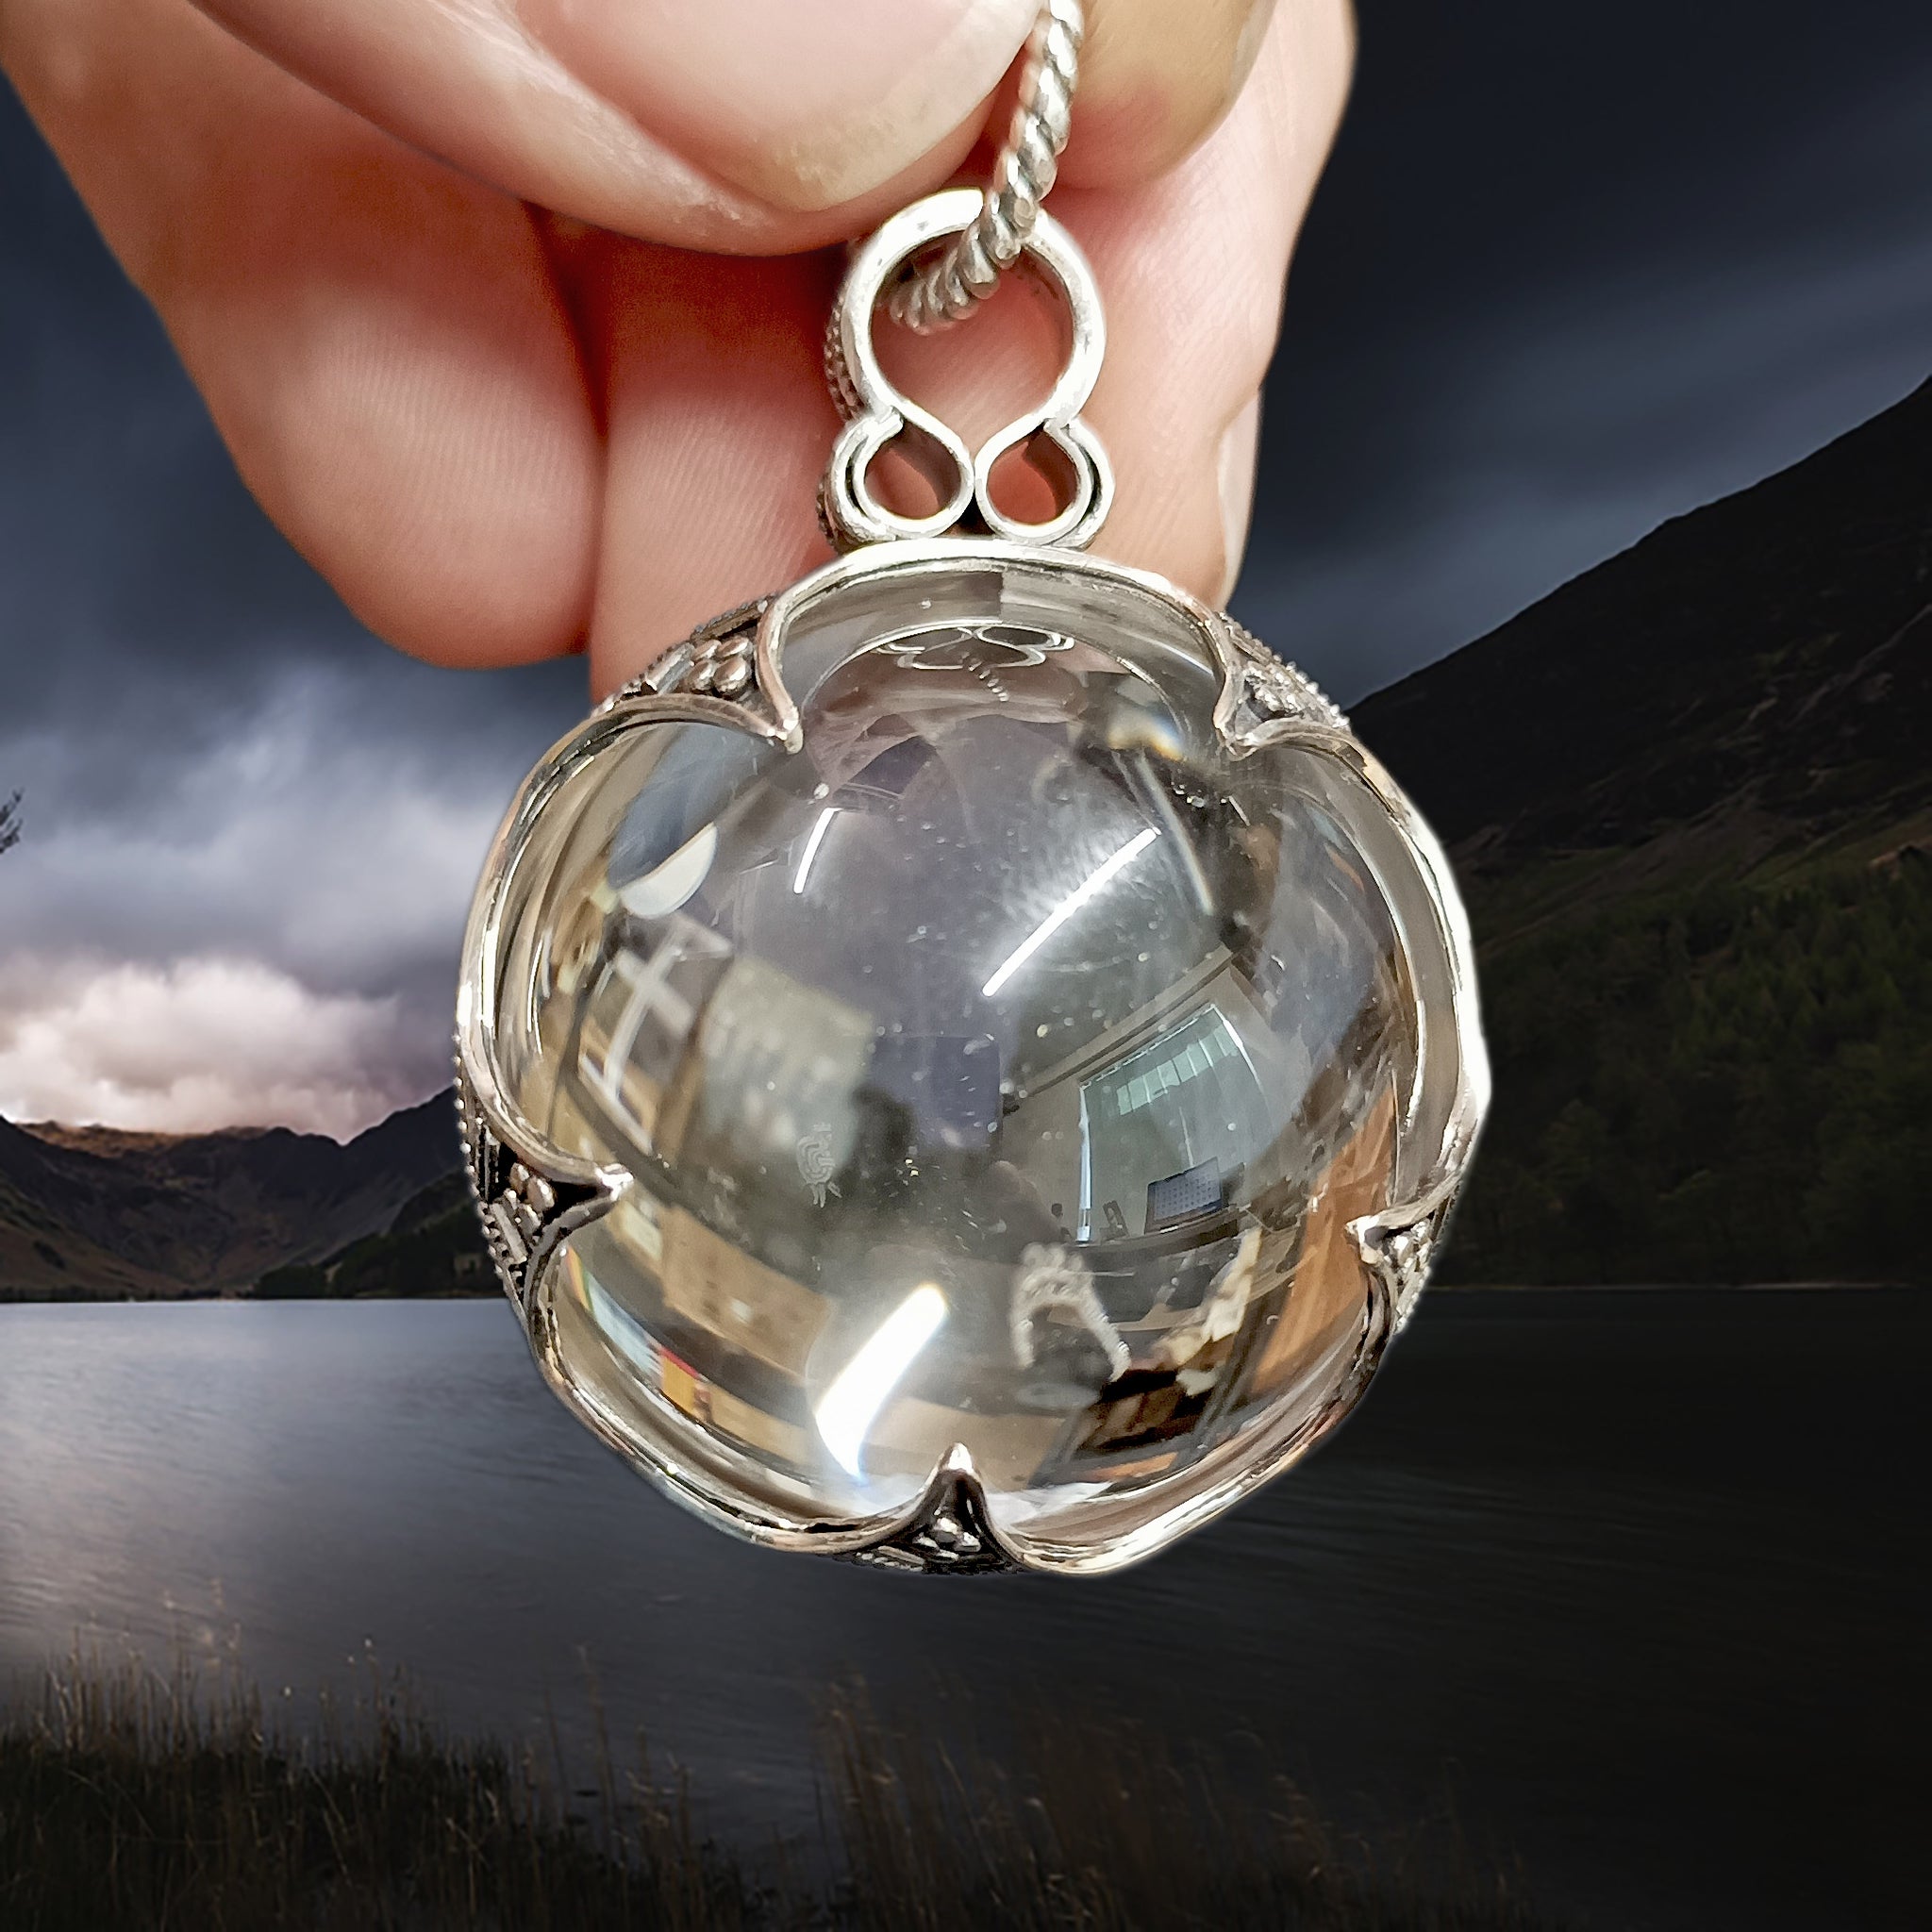 Large Silver Gotland Crystal Ball Pendant in Fingers - Front View